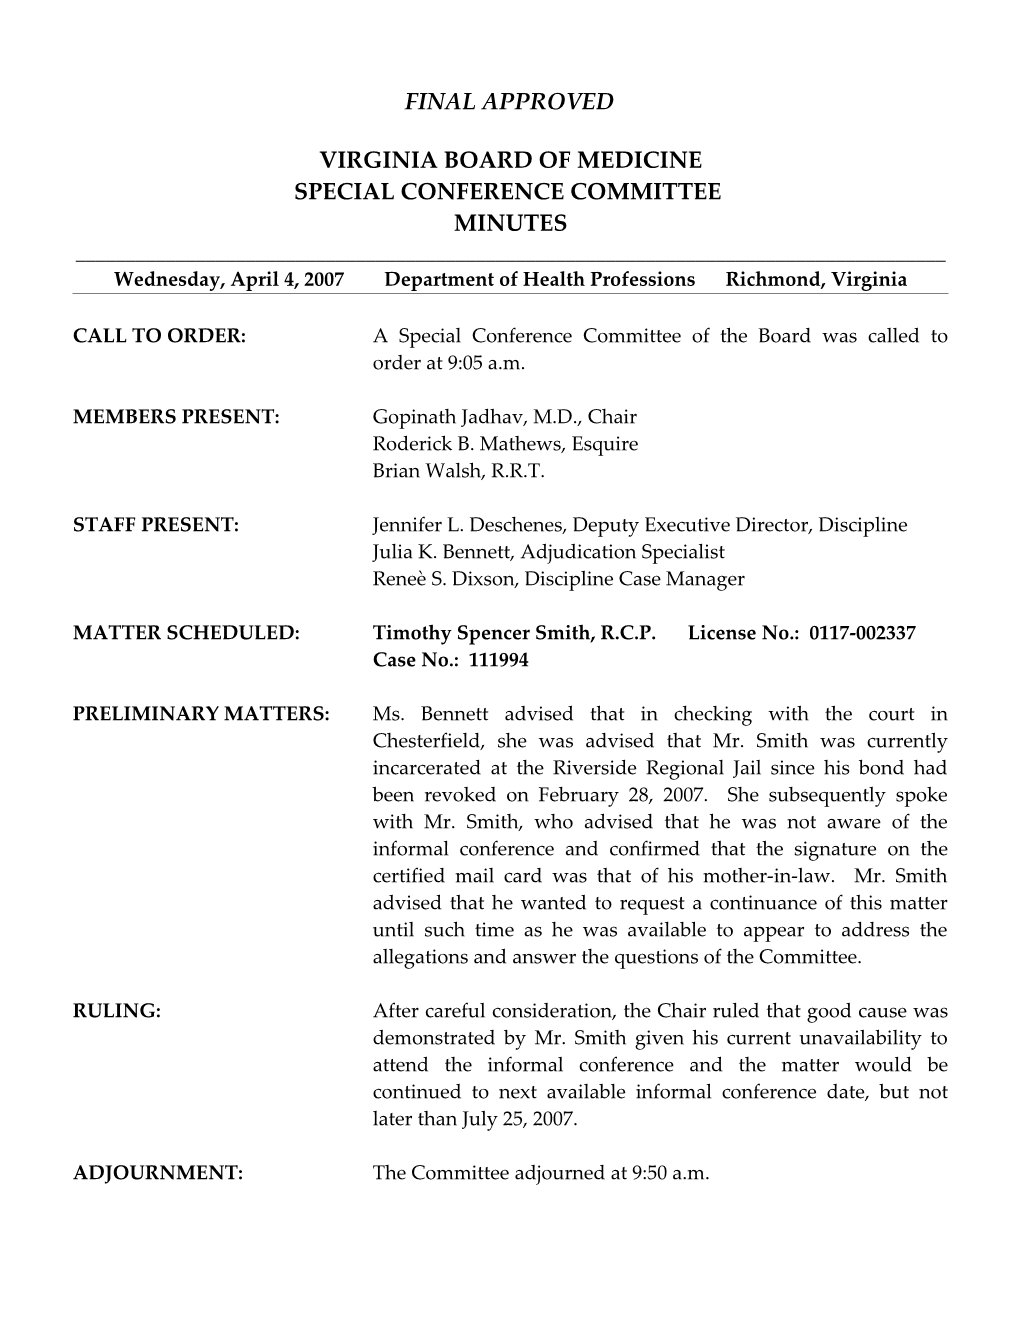 Medicine - FINAL APPROVED Minutes of April 4, 2007 Special Conference Committee